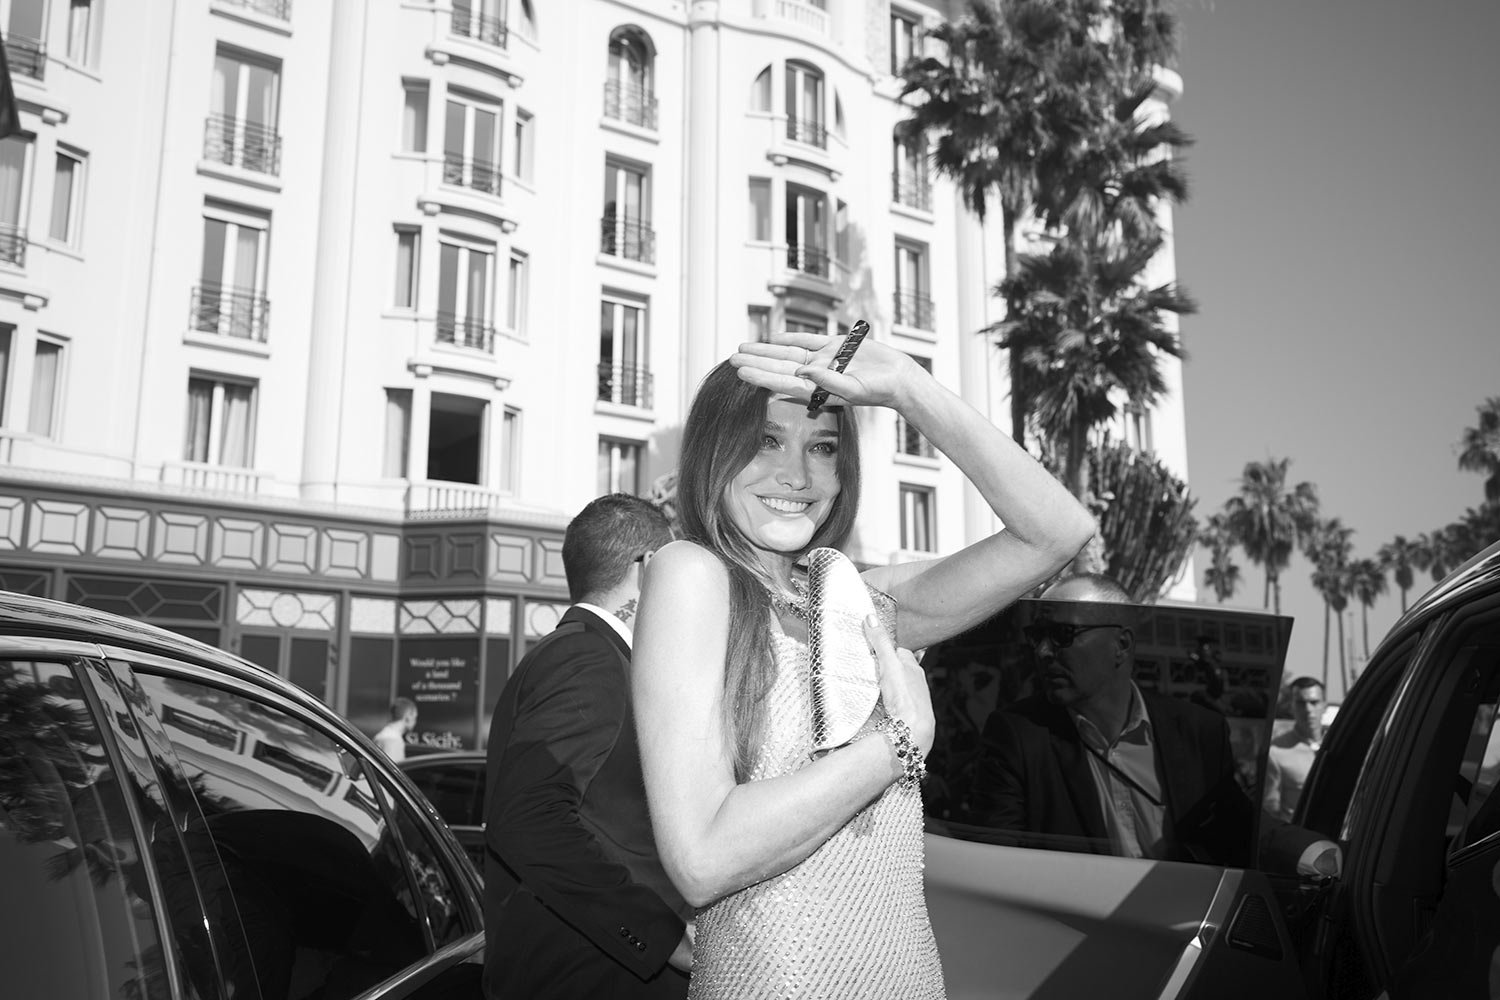  Carla Bruni leaves from the Majestic hotel for the premiere of the film 'Triangle of Sadness' at the 75th international film festival, Cannes, southern France, Saturday, May 21, 2022. (AP Photo/Petros Giannakouris) 